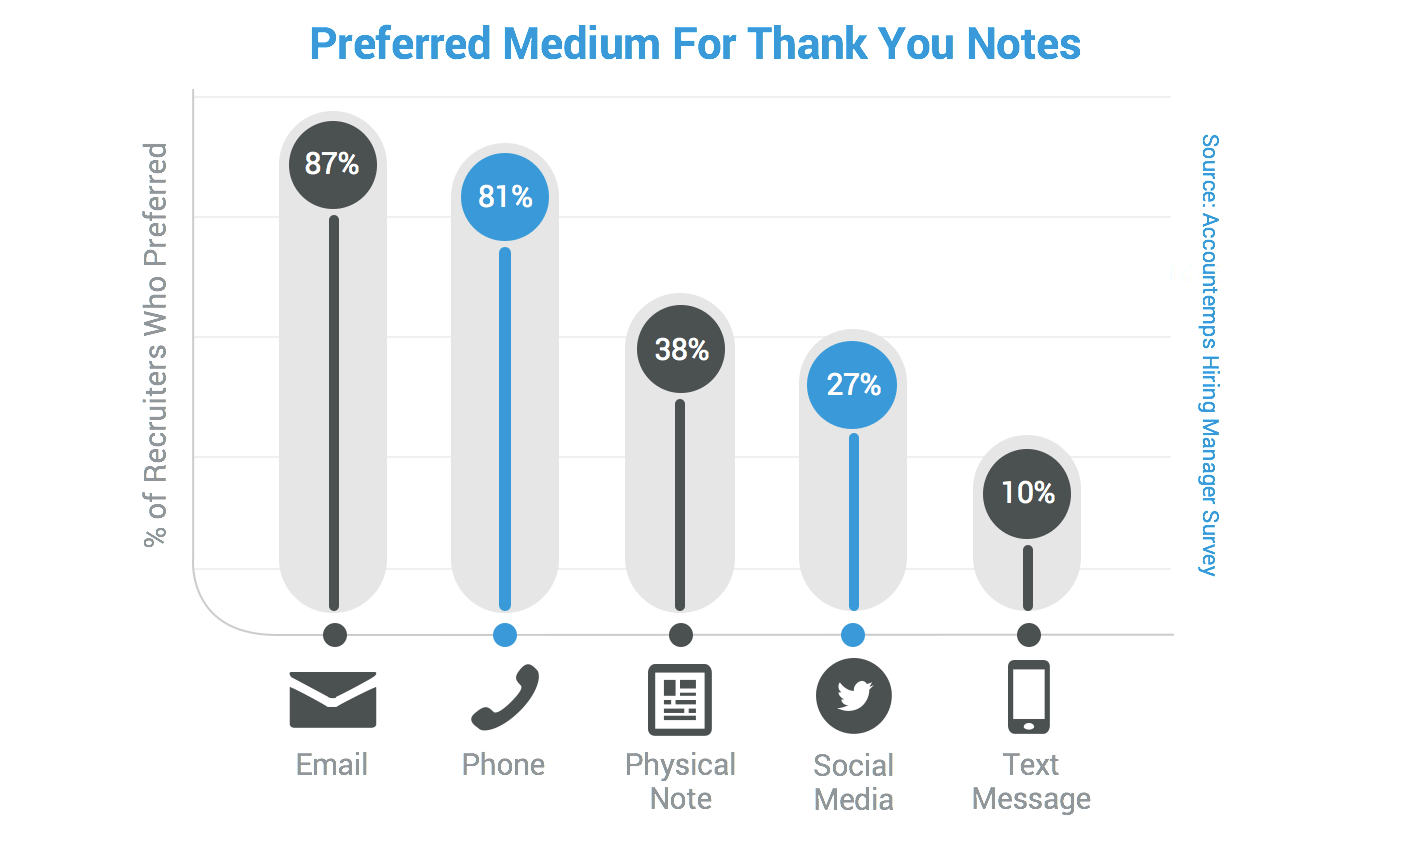 Graphic of Survey Results on Preferred Thank You Note Medium